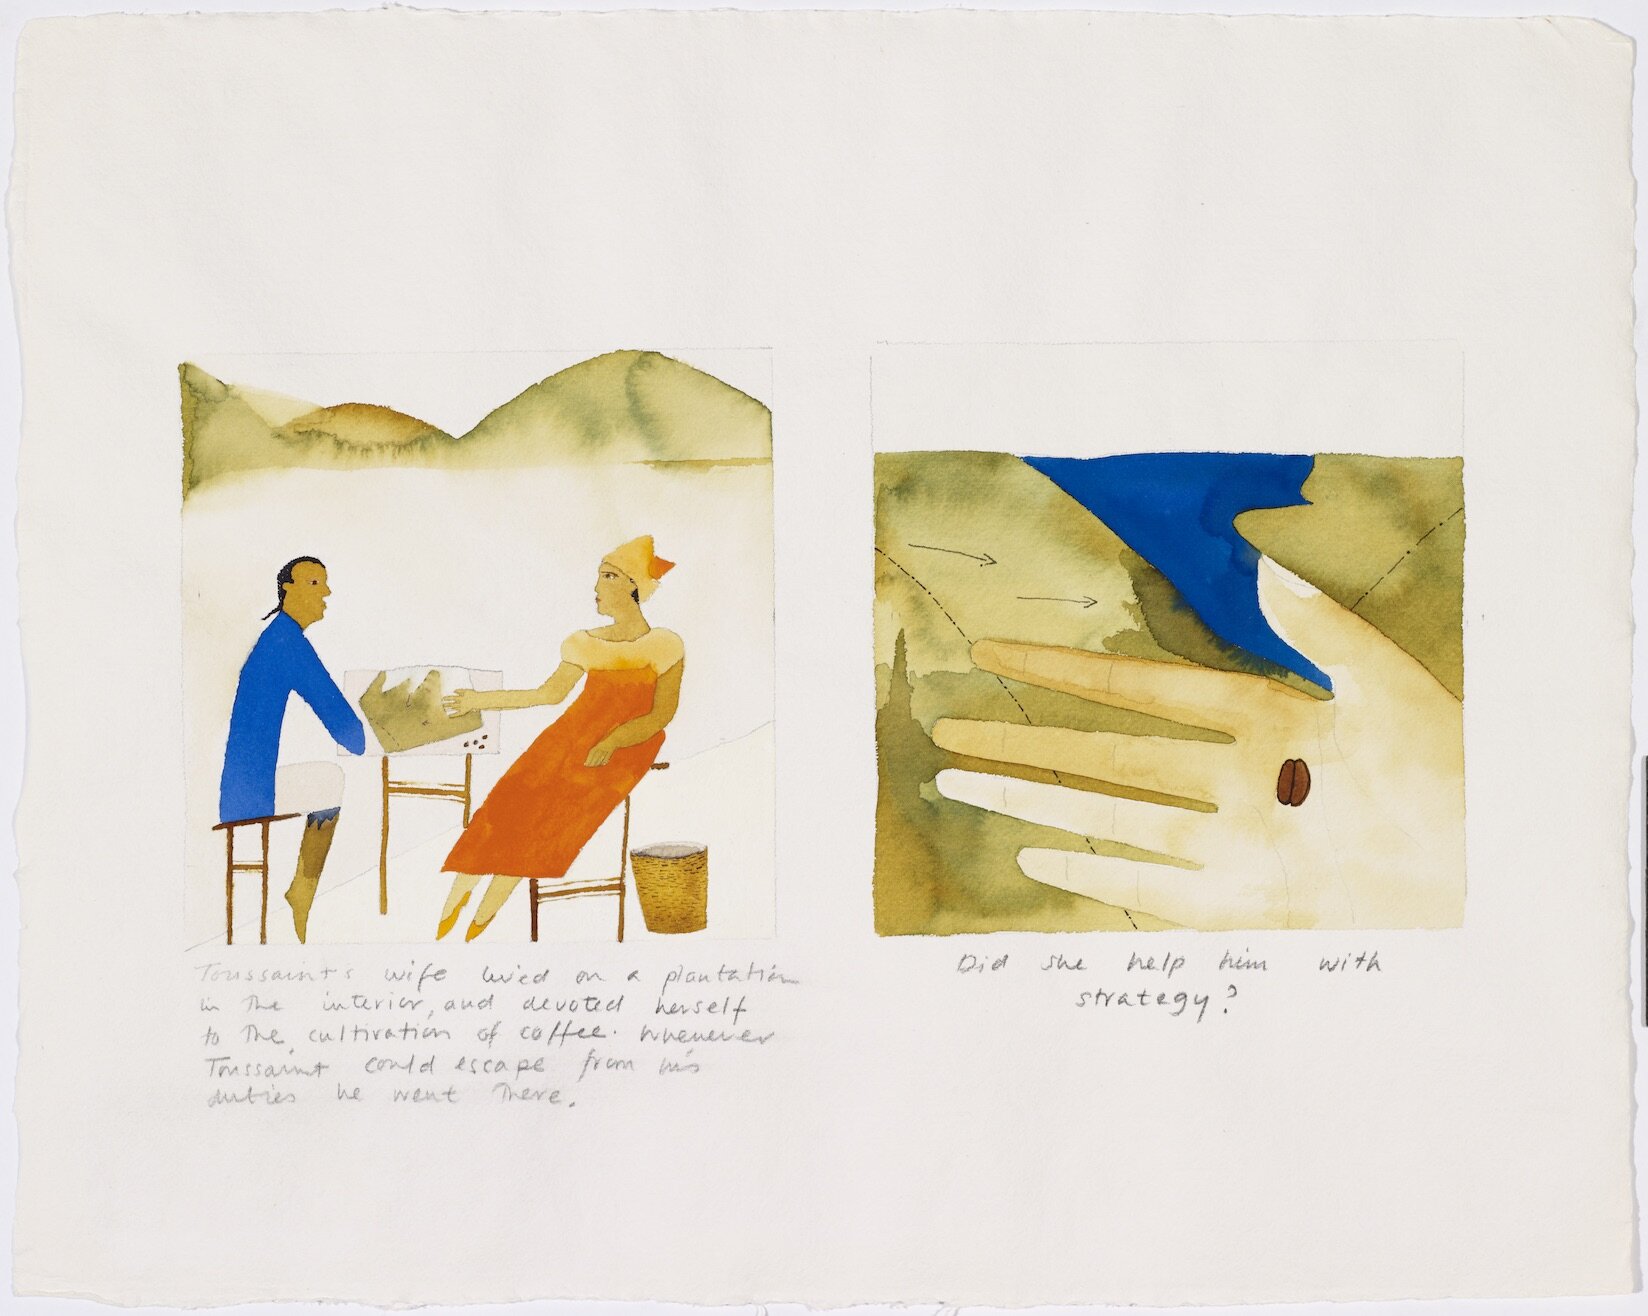 Lubaina Himid, Scenes from the Life of Toussaint L'Ouverture: 5 (1987), watercolour and pencil on paper, 39.5 x 50 cm. Arts Council Collection, Southbank Centre, London © Lubaina Himid.